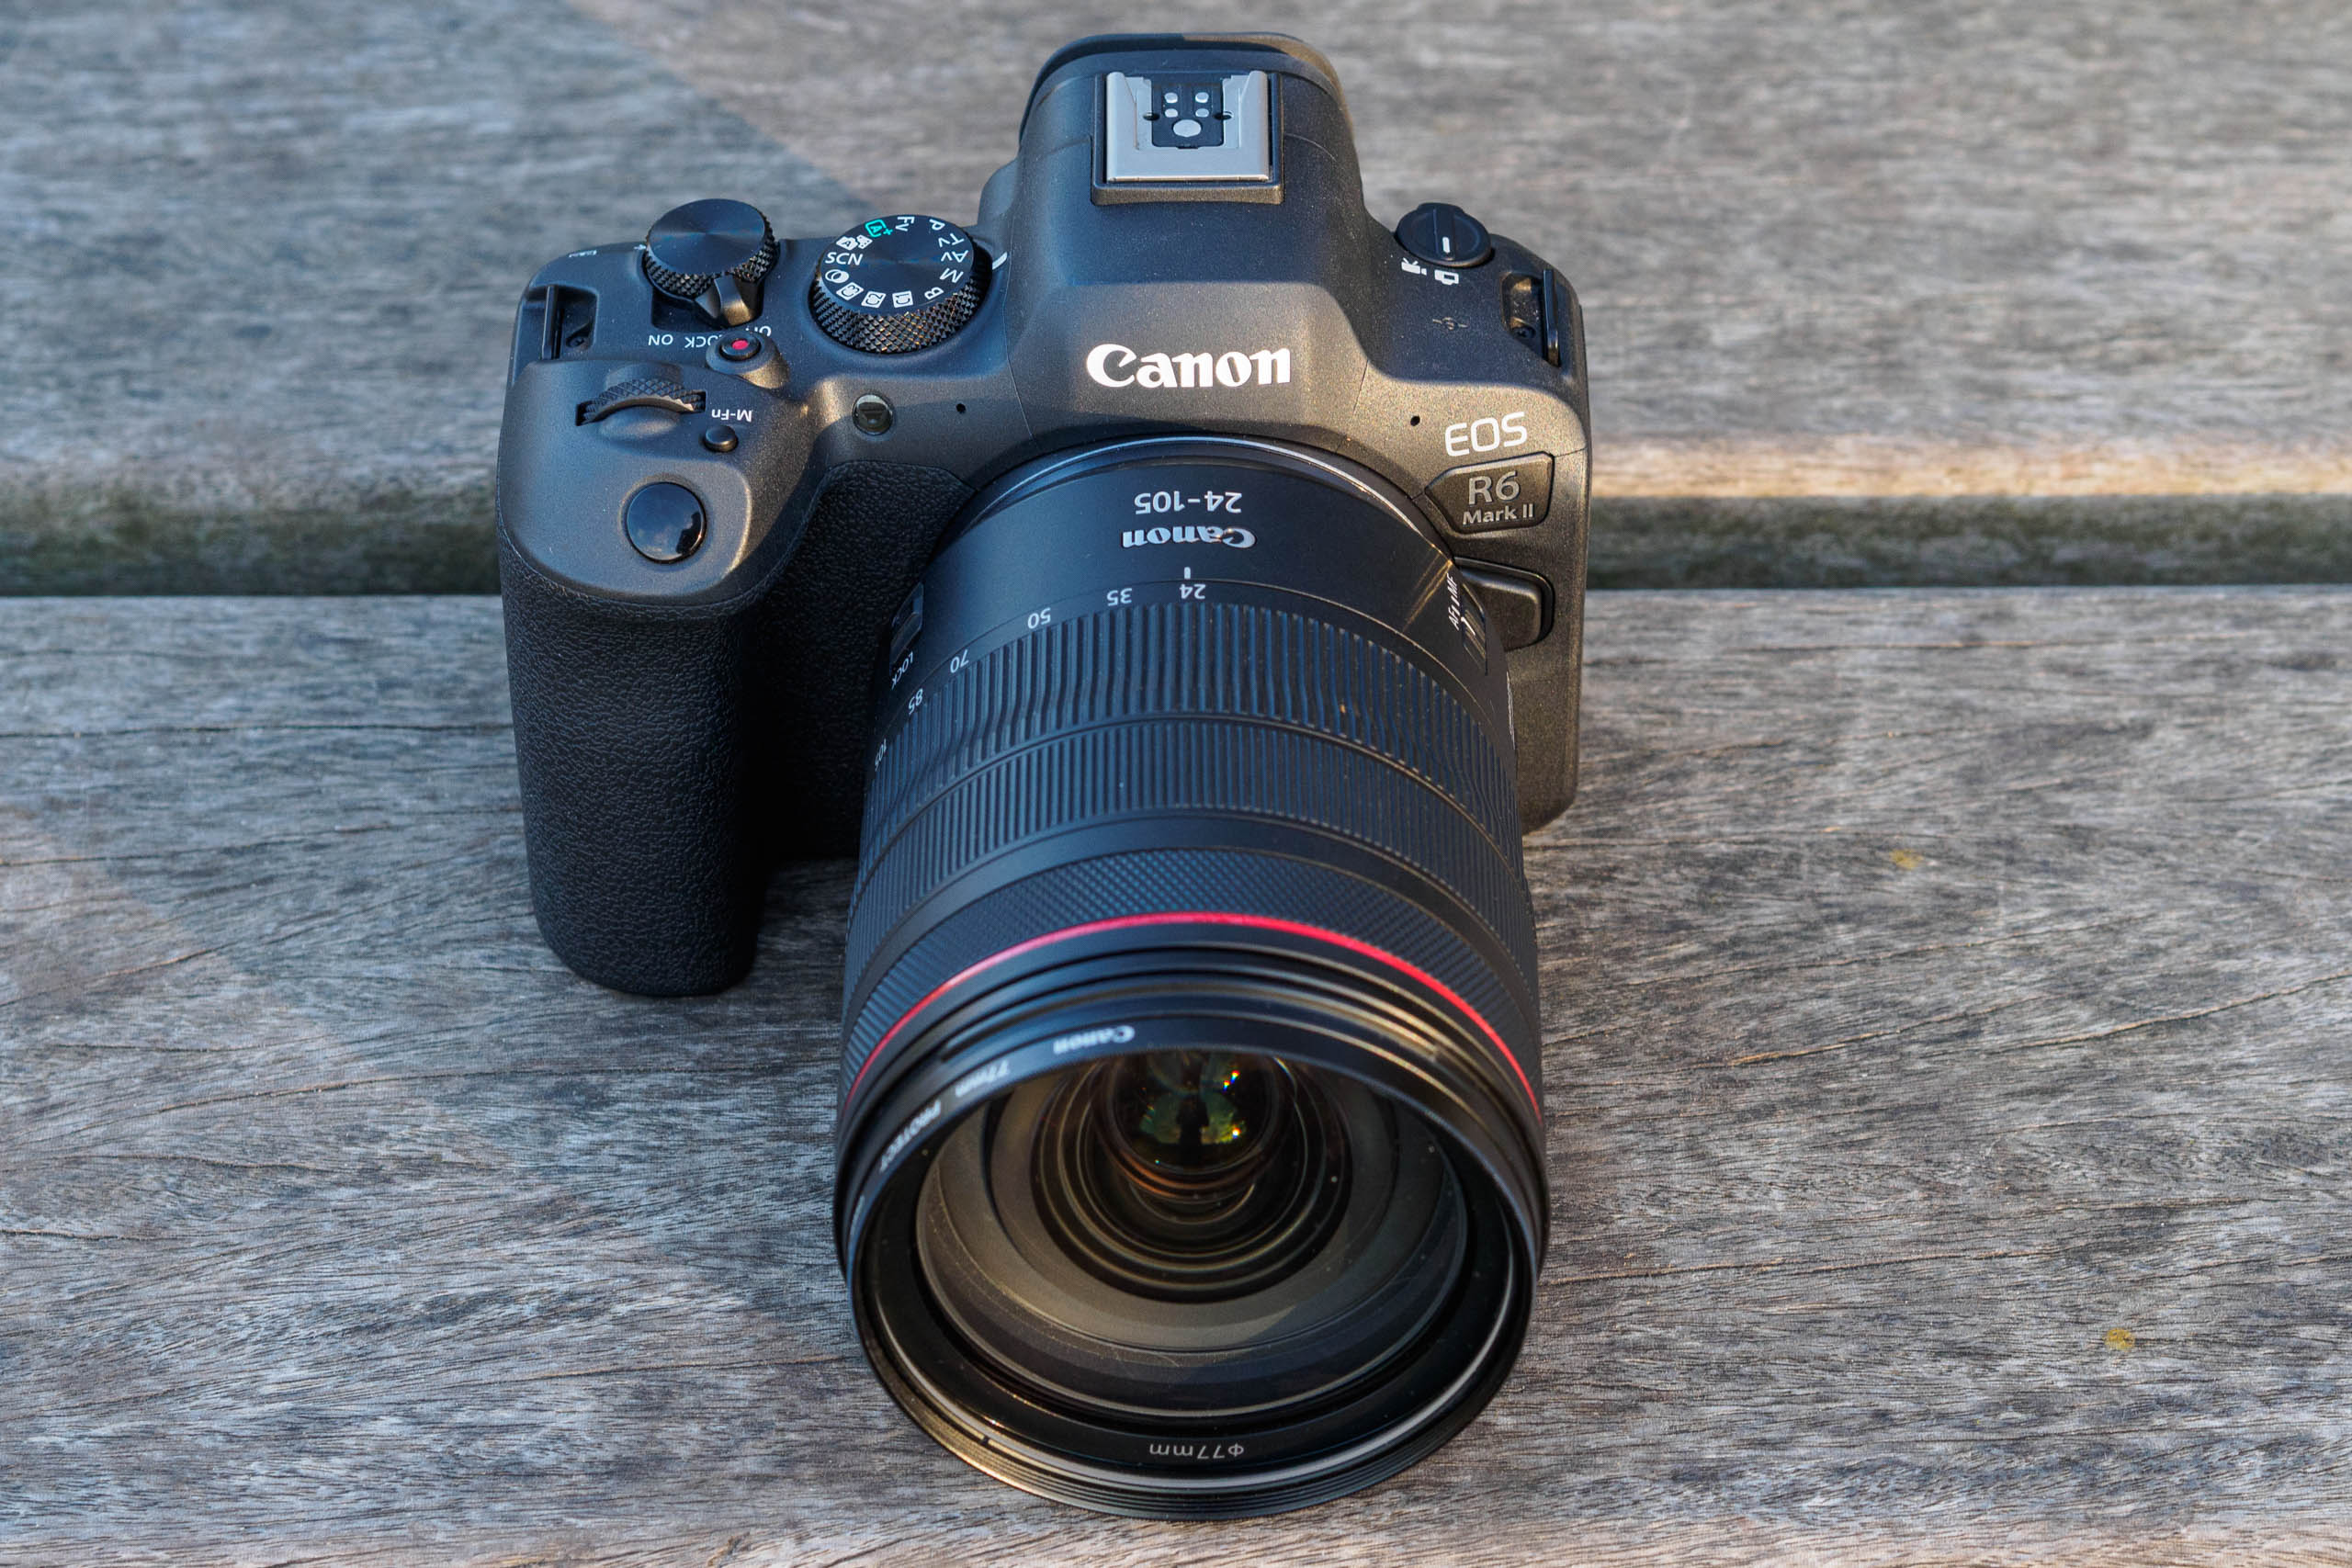 Canon EOS R6 Mark II review